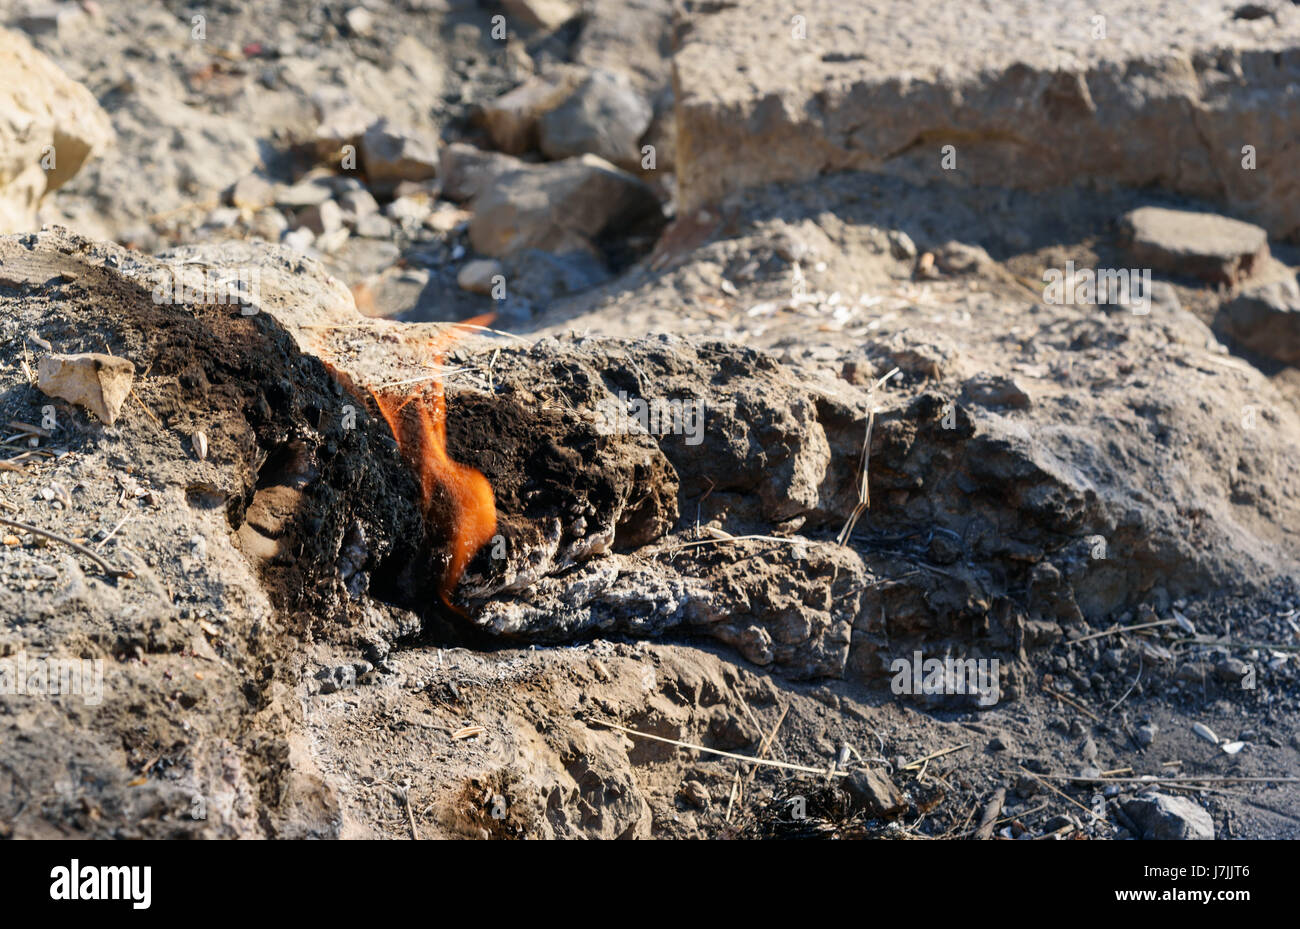 Flames of Chimaera Mount from the ground. Fire from natural gas in the rocks. Turkey Stock Photo